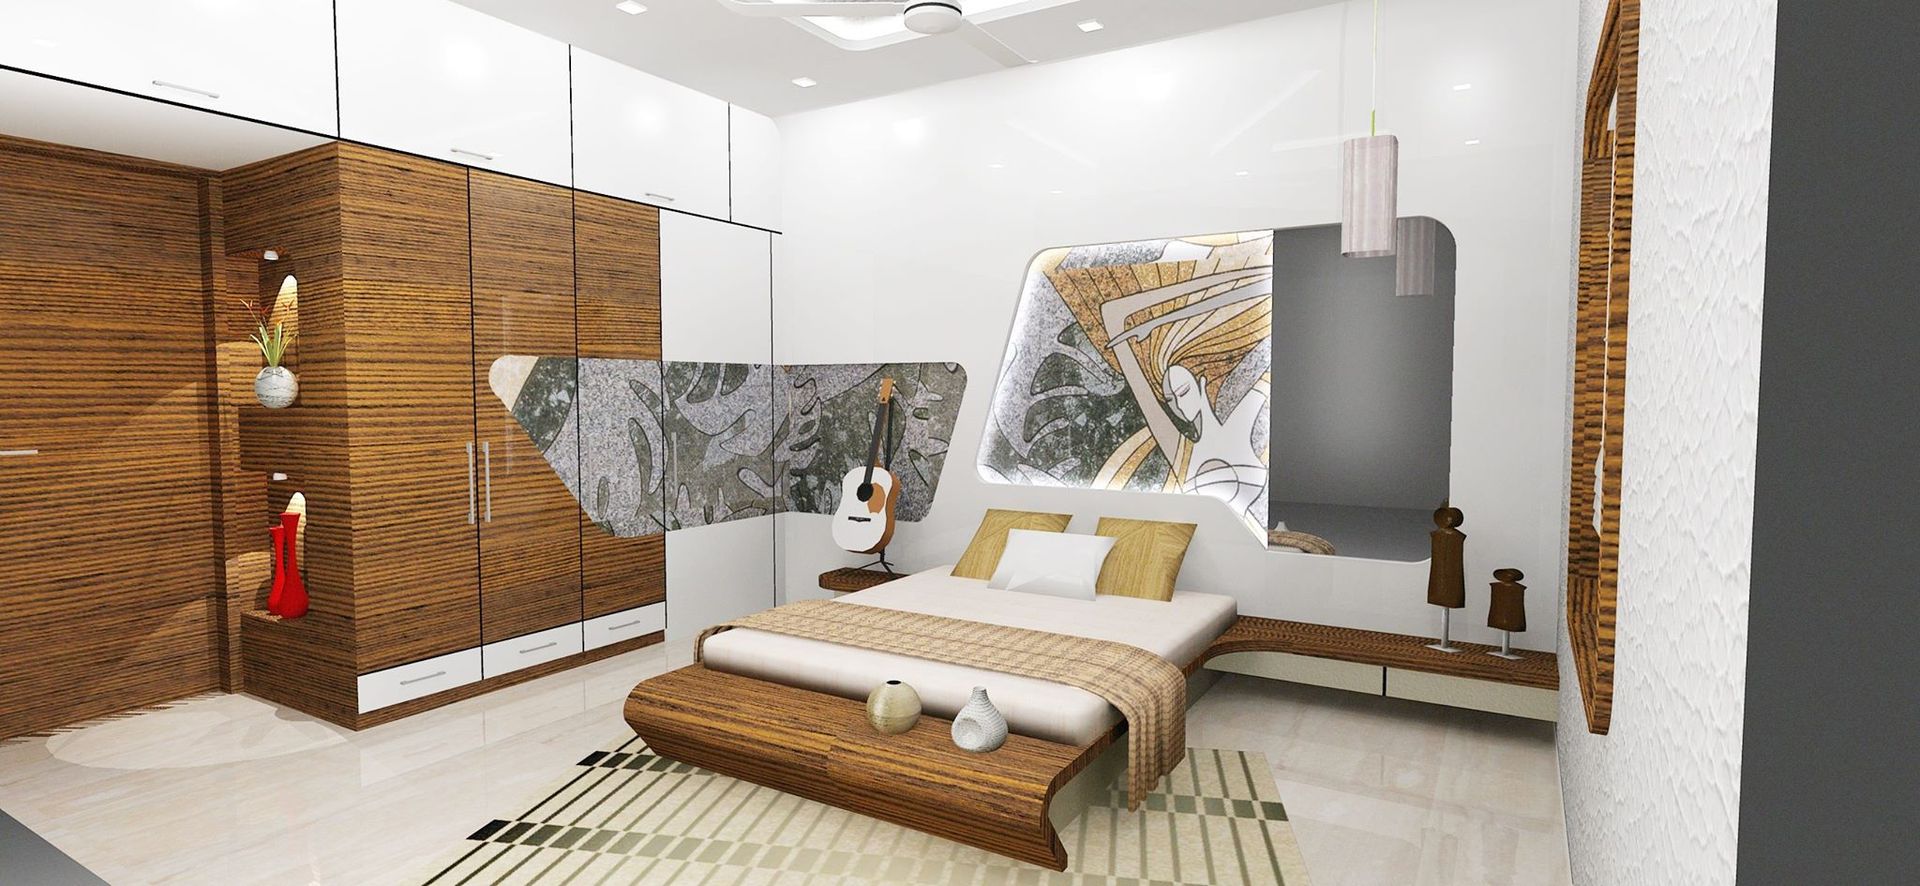 Bedroom Designs, Archsmith project consultant Archsmith project consultant Modern Yatak Odası